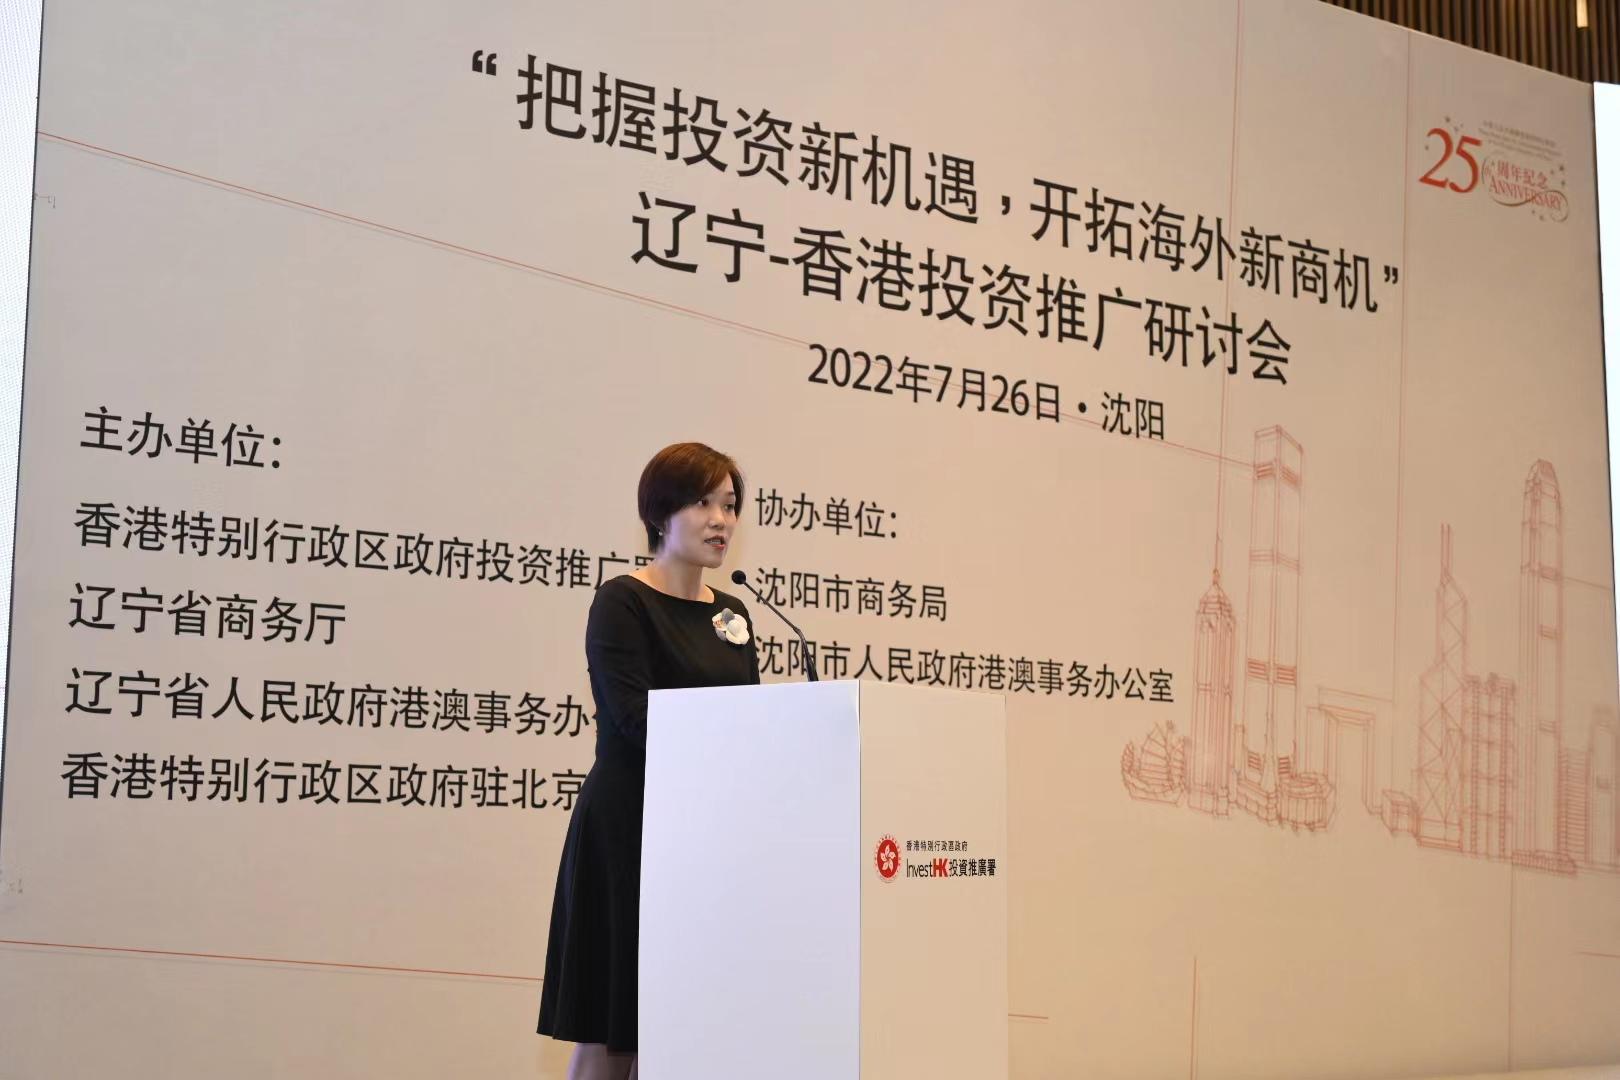 Invest Hong Kong, the People's Government of Liaoning Province and the Office of the Government of the Hong Kong Special Administrative Region (HKSAR) in Beijing co-hosted a seminar in Shenyang, Liaoning Province, today (July 26). Photo shows the Assistant Director of the Office of the Government of the HKSAR in Beijing, Miss Vinci Chan, delivering her welcoming remarks at the seminar in Shenyang.

